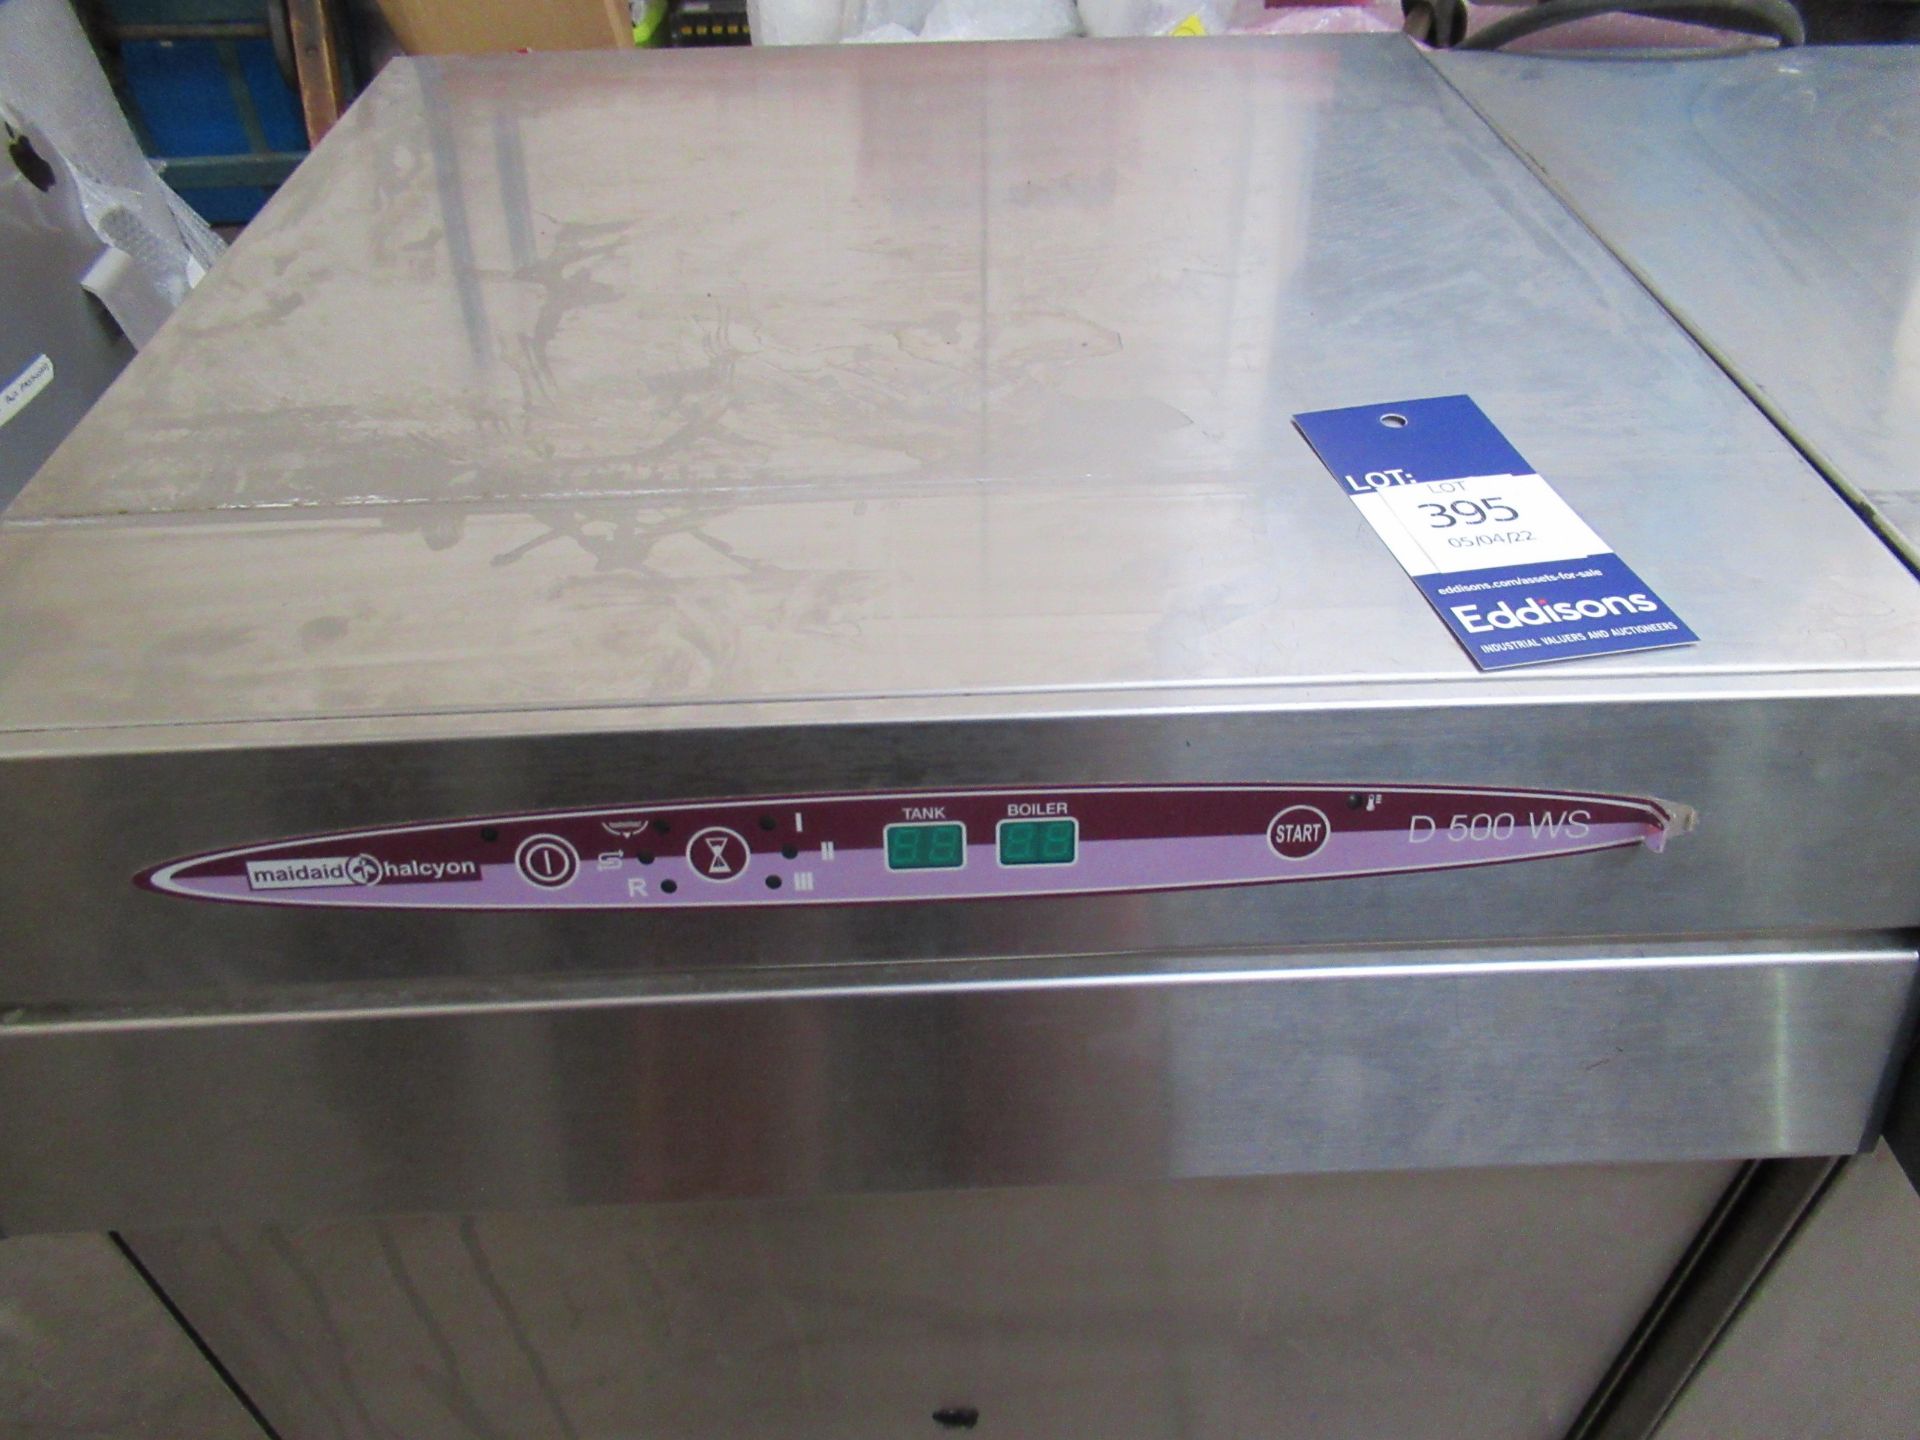 Maidaid Halcyon D500 WS glass washer - Image 2 of 2